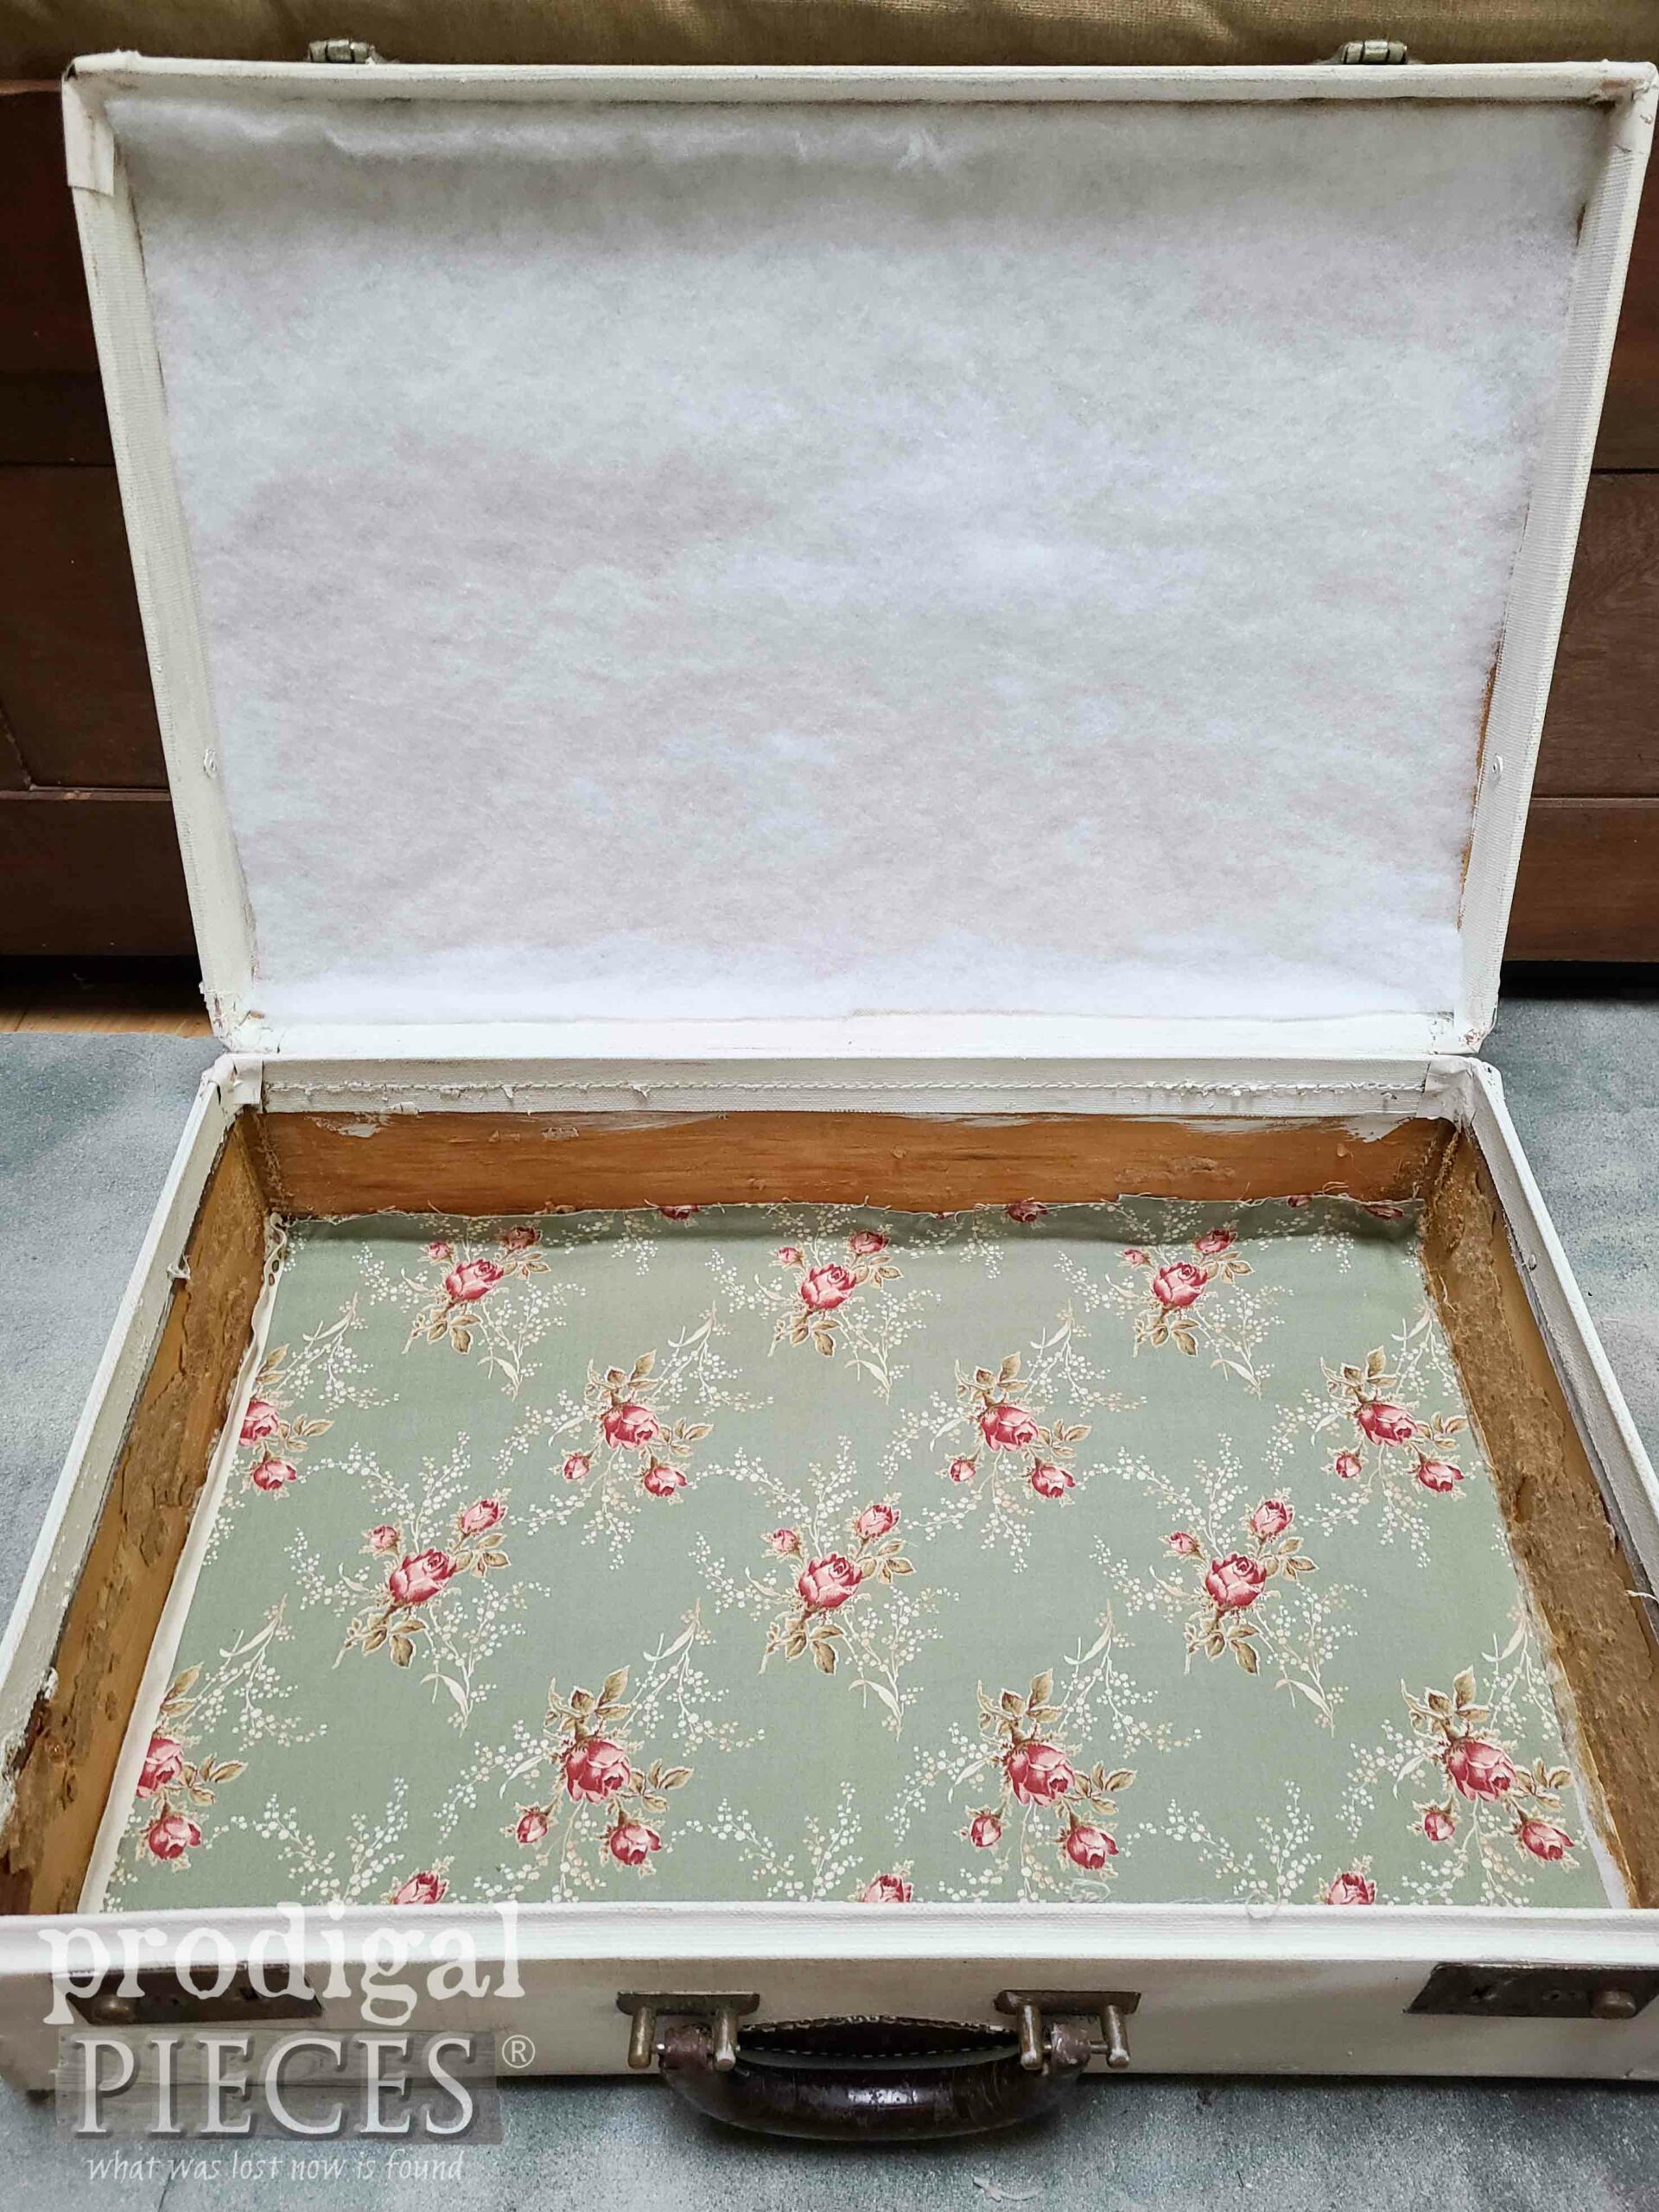 Rose Fabric Lining in Vintage Luggage Painted | prodigalpieces.com #prodigalpieces